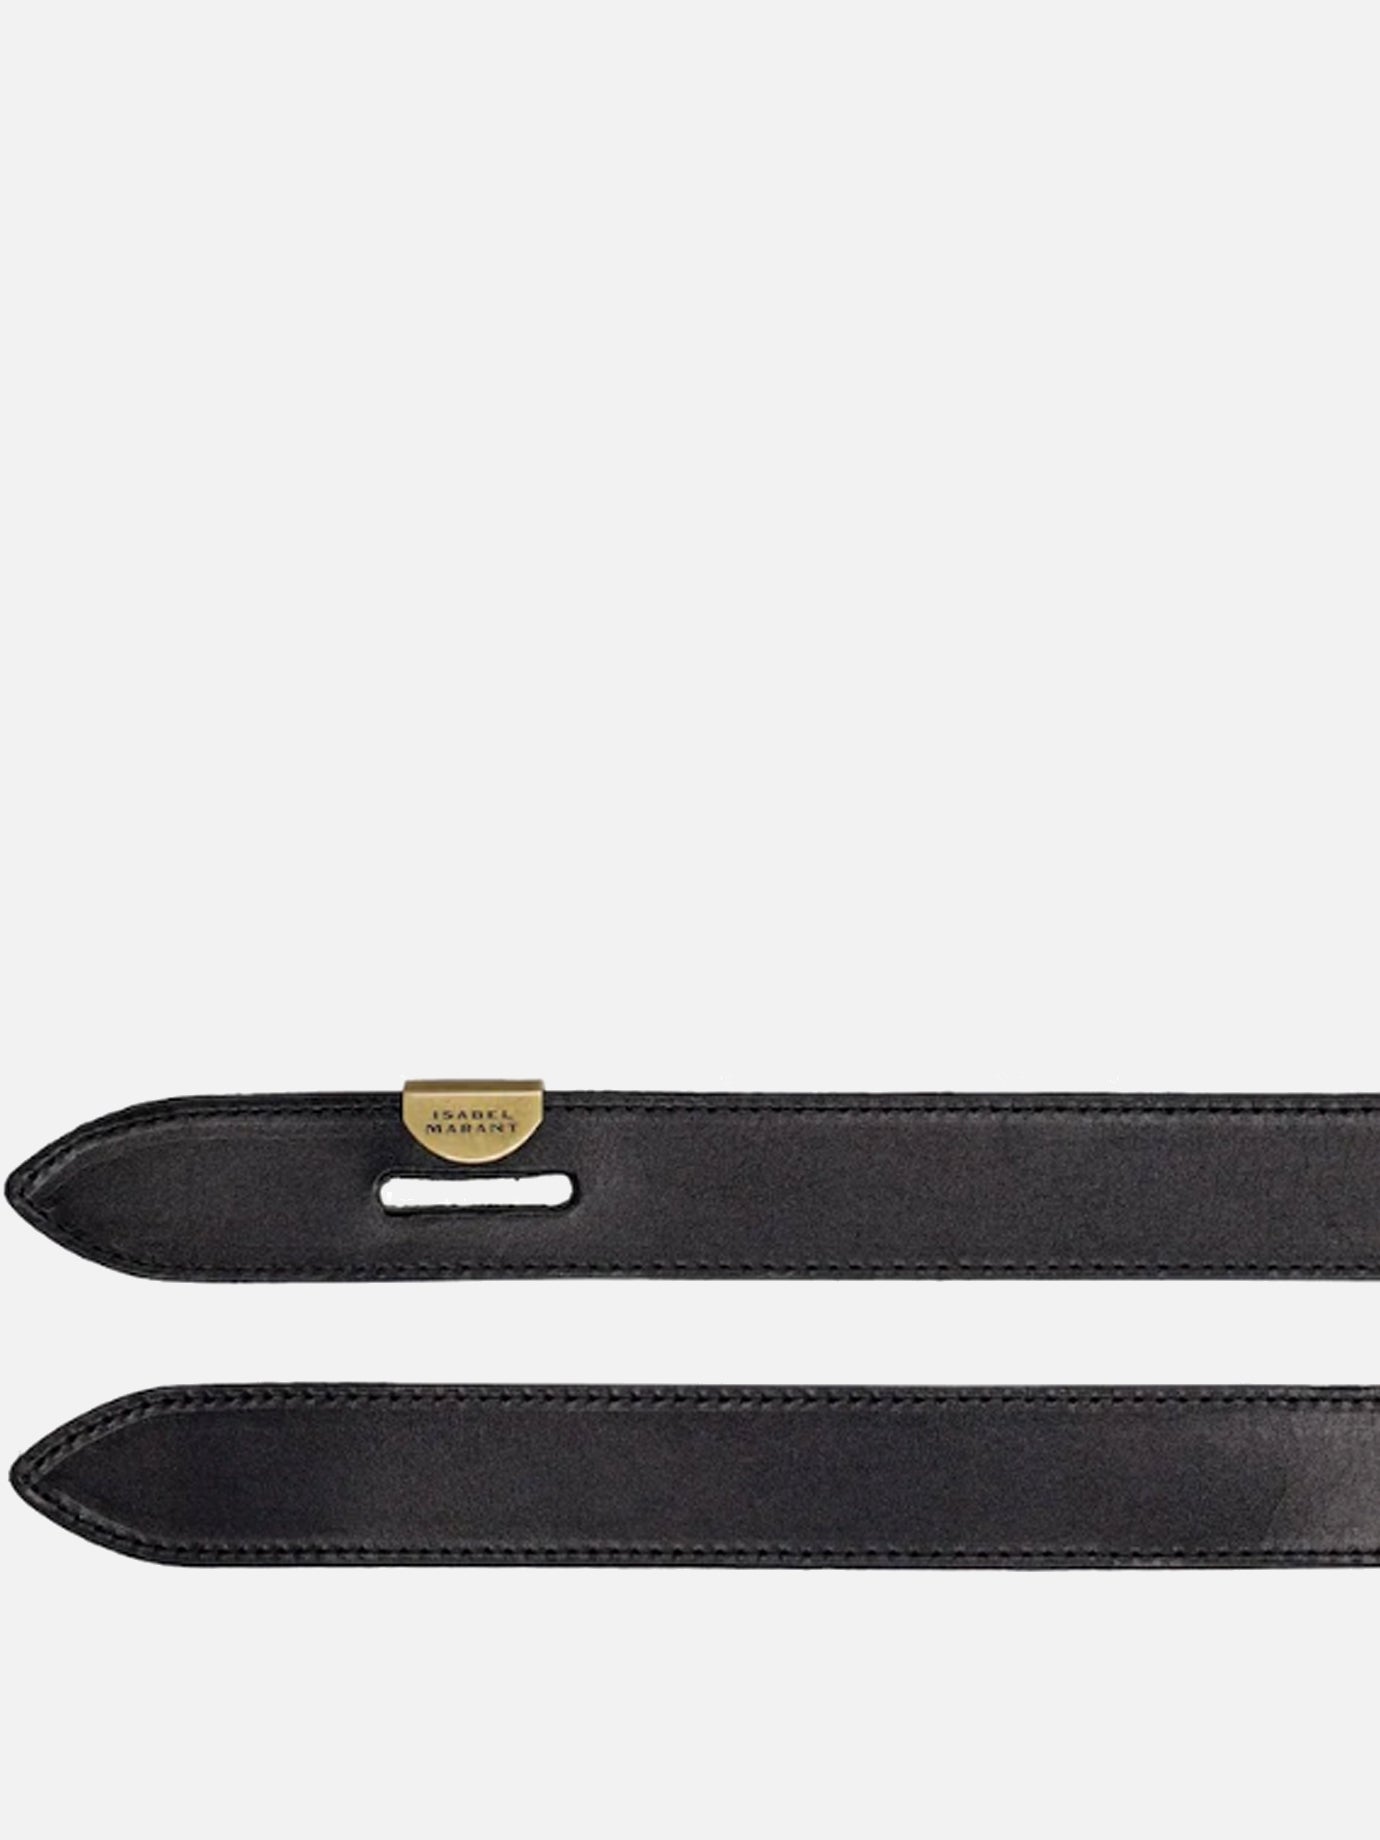 "Lecce" knotted belt